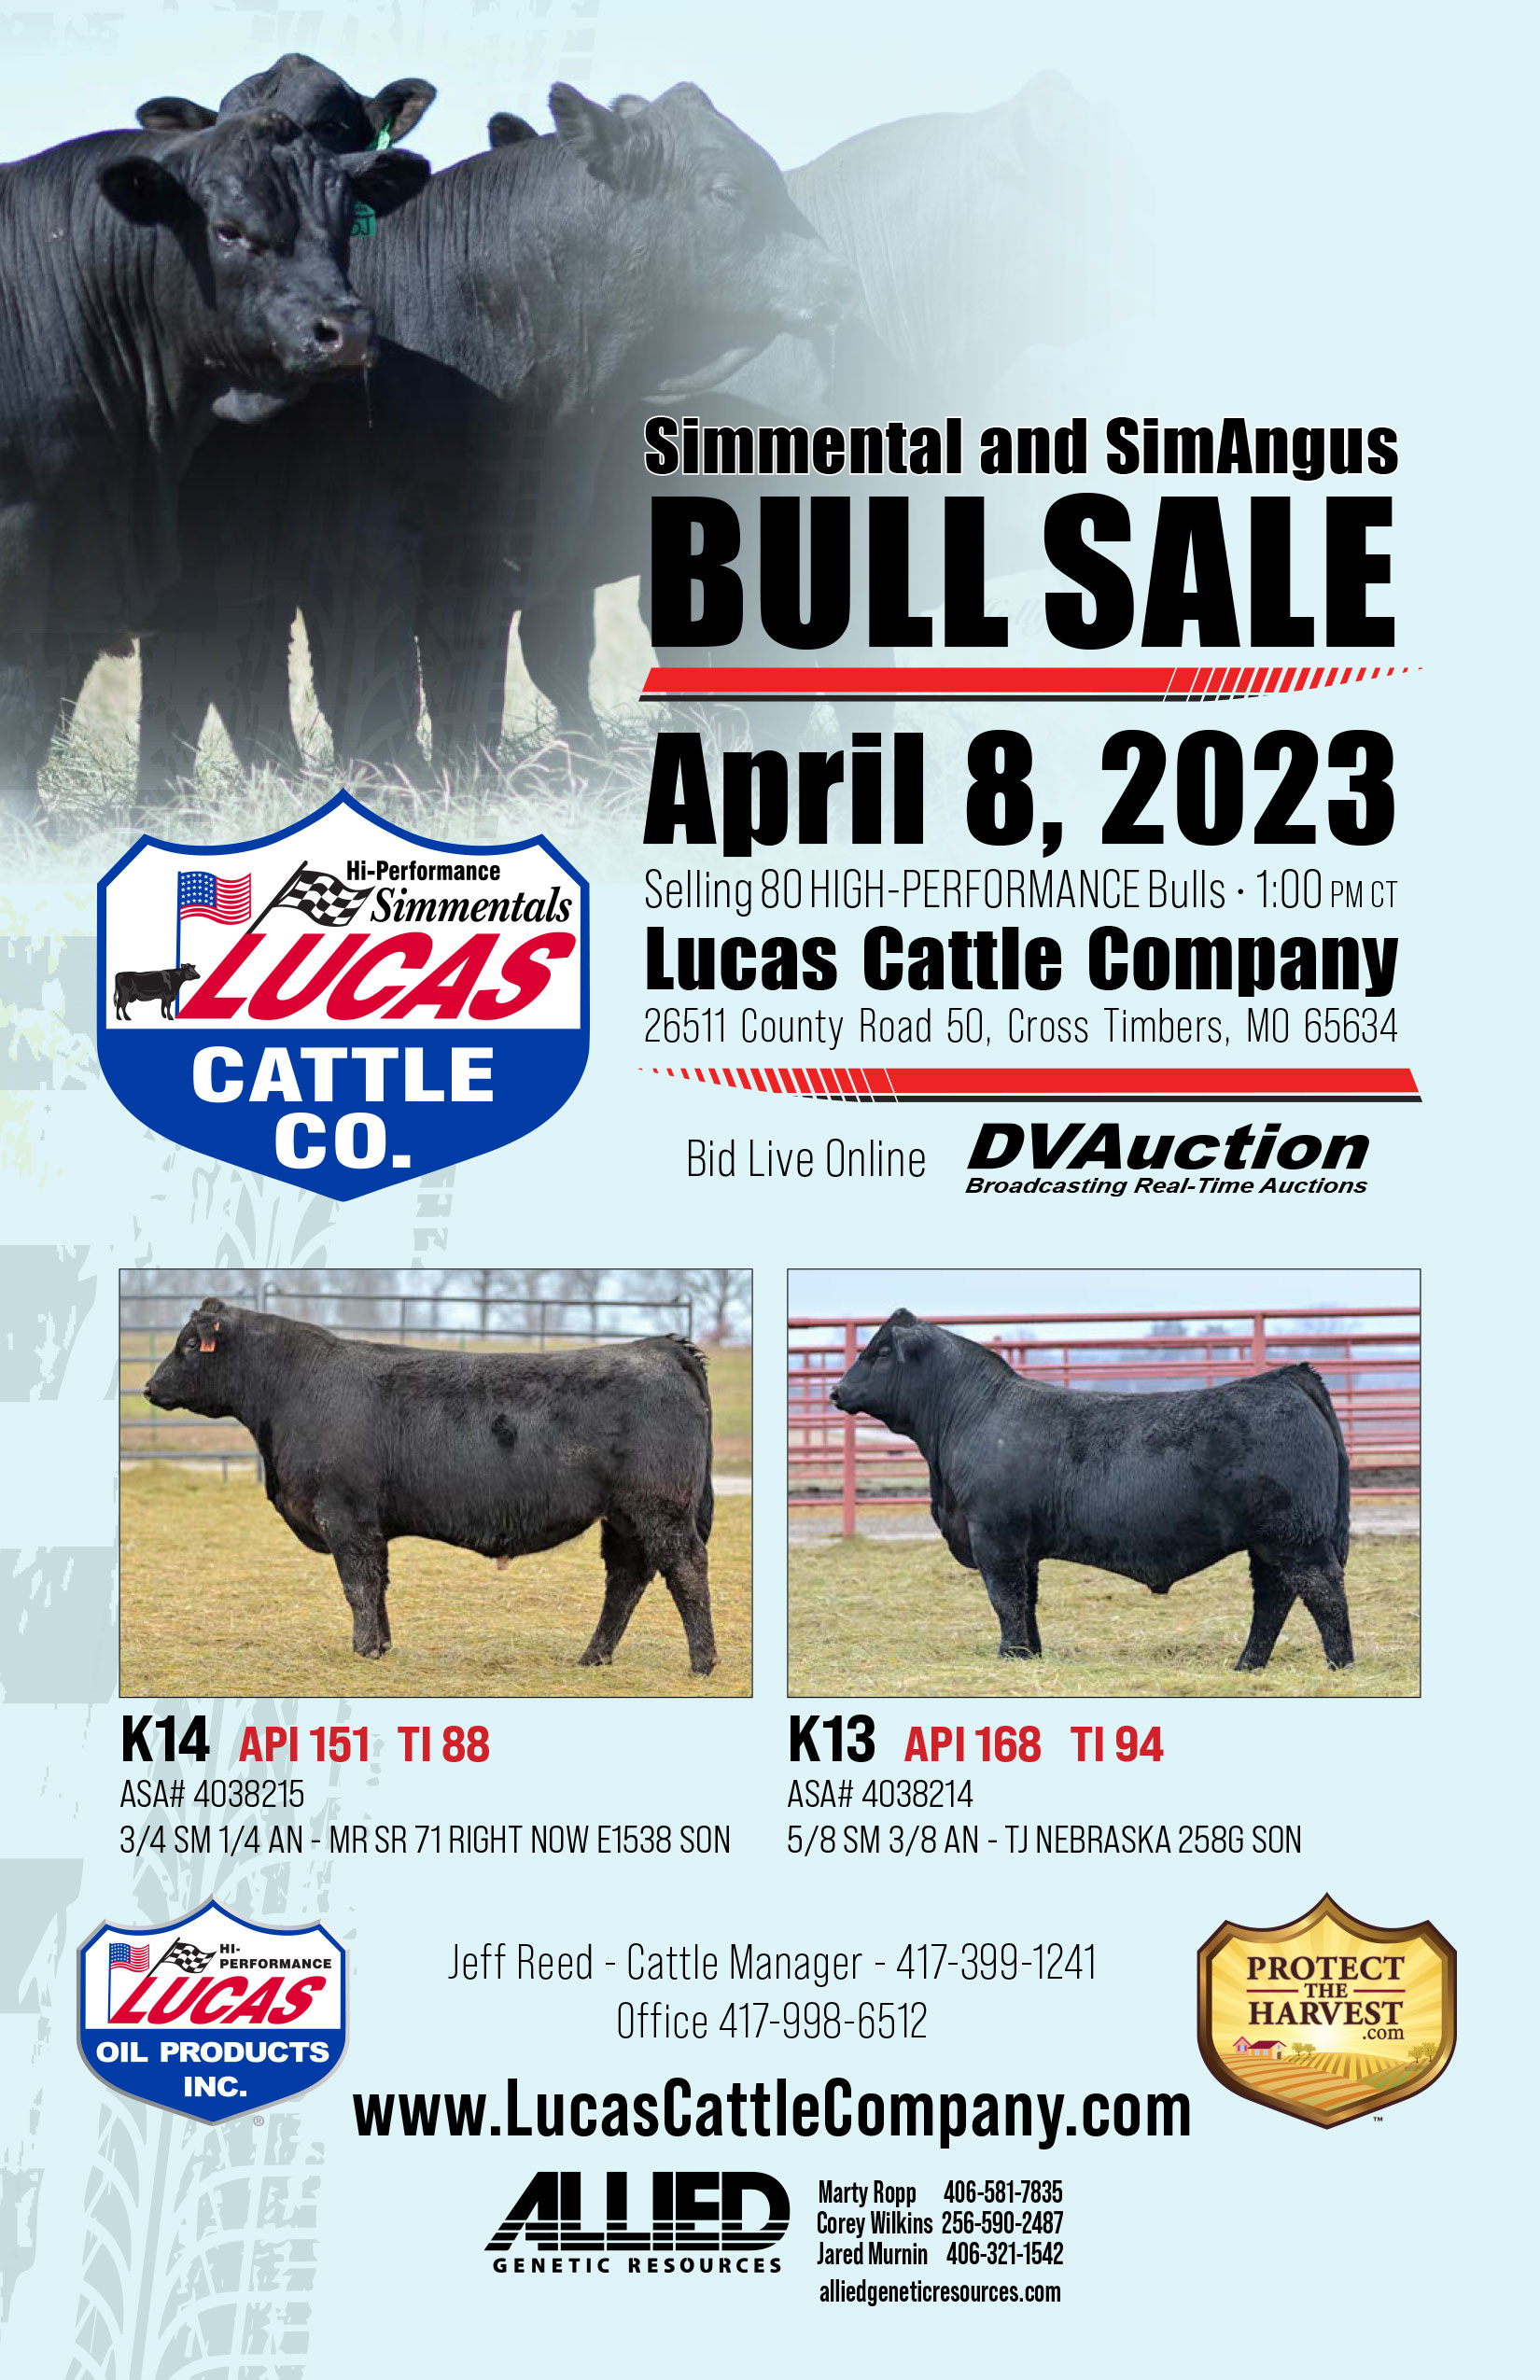 Lucas Cattle Company Simmental and SimAngus Bull Sale - April 8, 2023